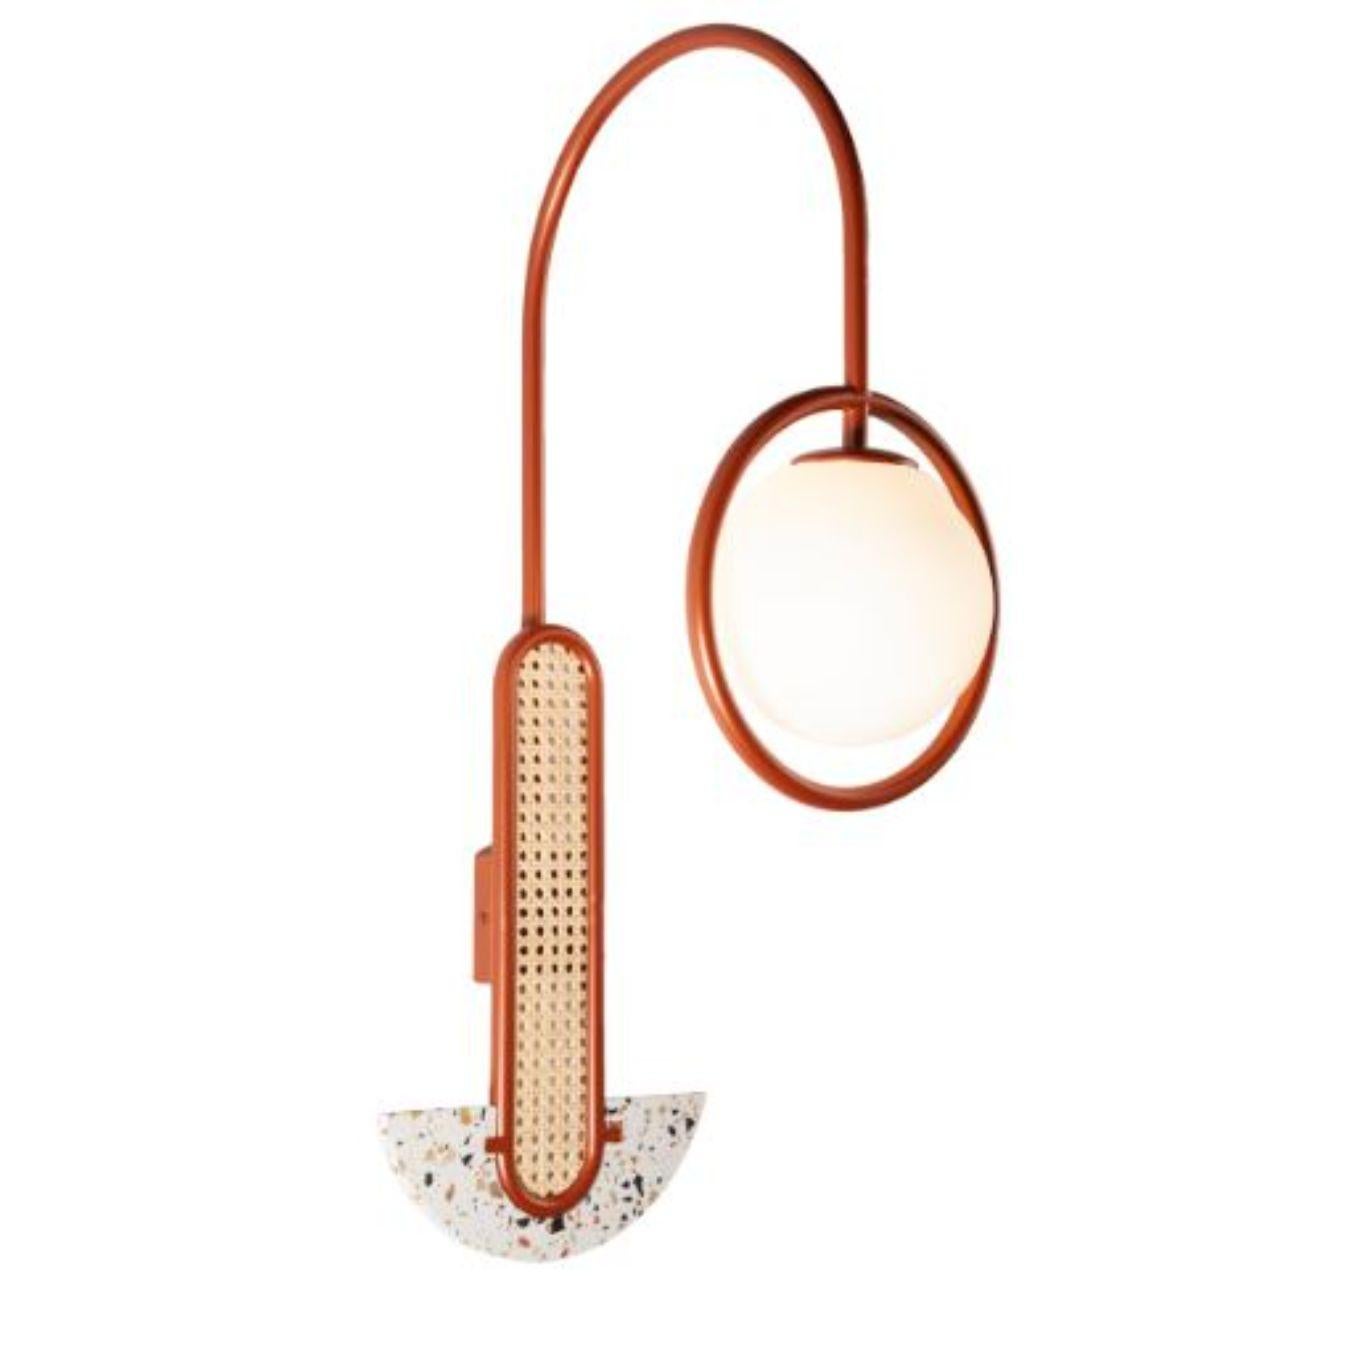 Copper Frame wall lamp by Dooq
Dimensions: W 45 x D 28 x H 85.5 cm
Materials: lacquered metal, rattan, terrazzo.
Also available in different colors.

Information:
230V/50Hz
1 x max. G9
4W LED

120V/60Hz
1 x max. G9
4W LED

All our lamps can be wired